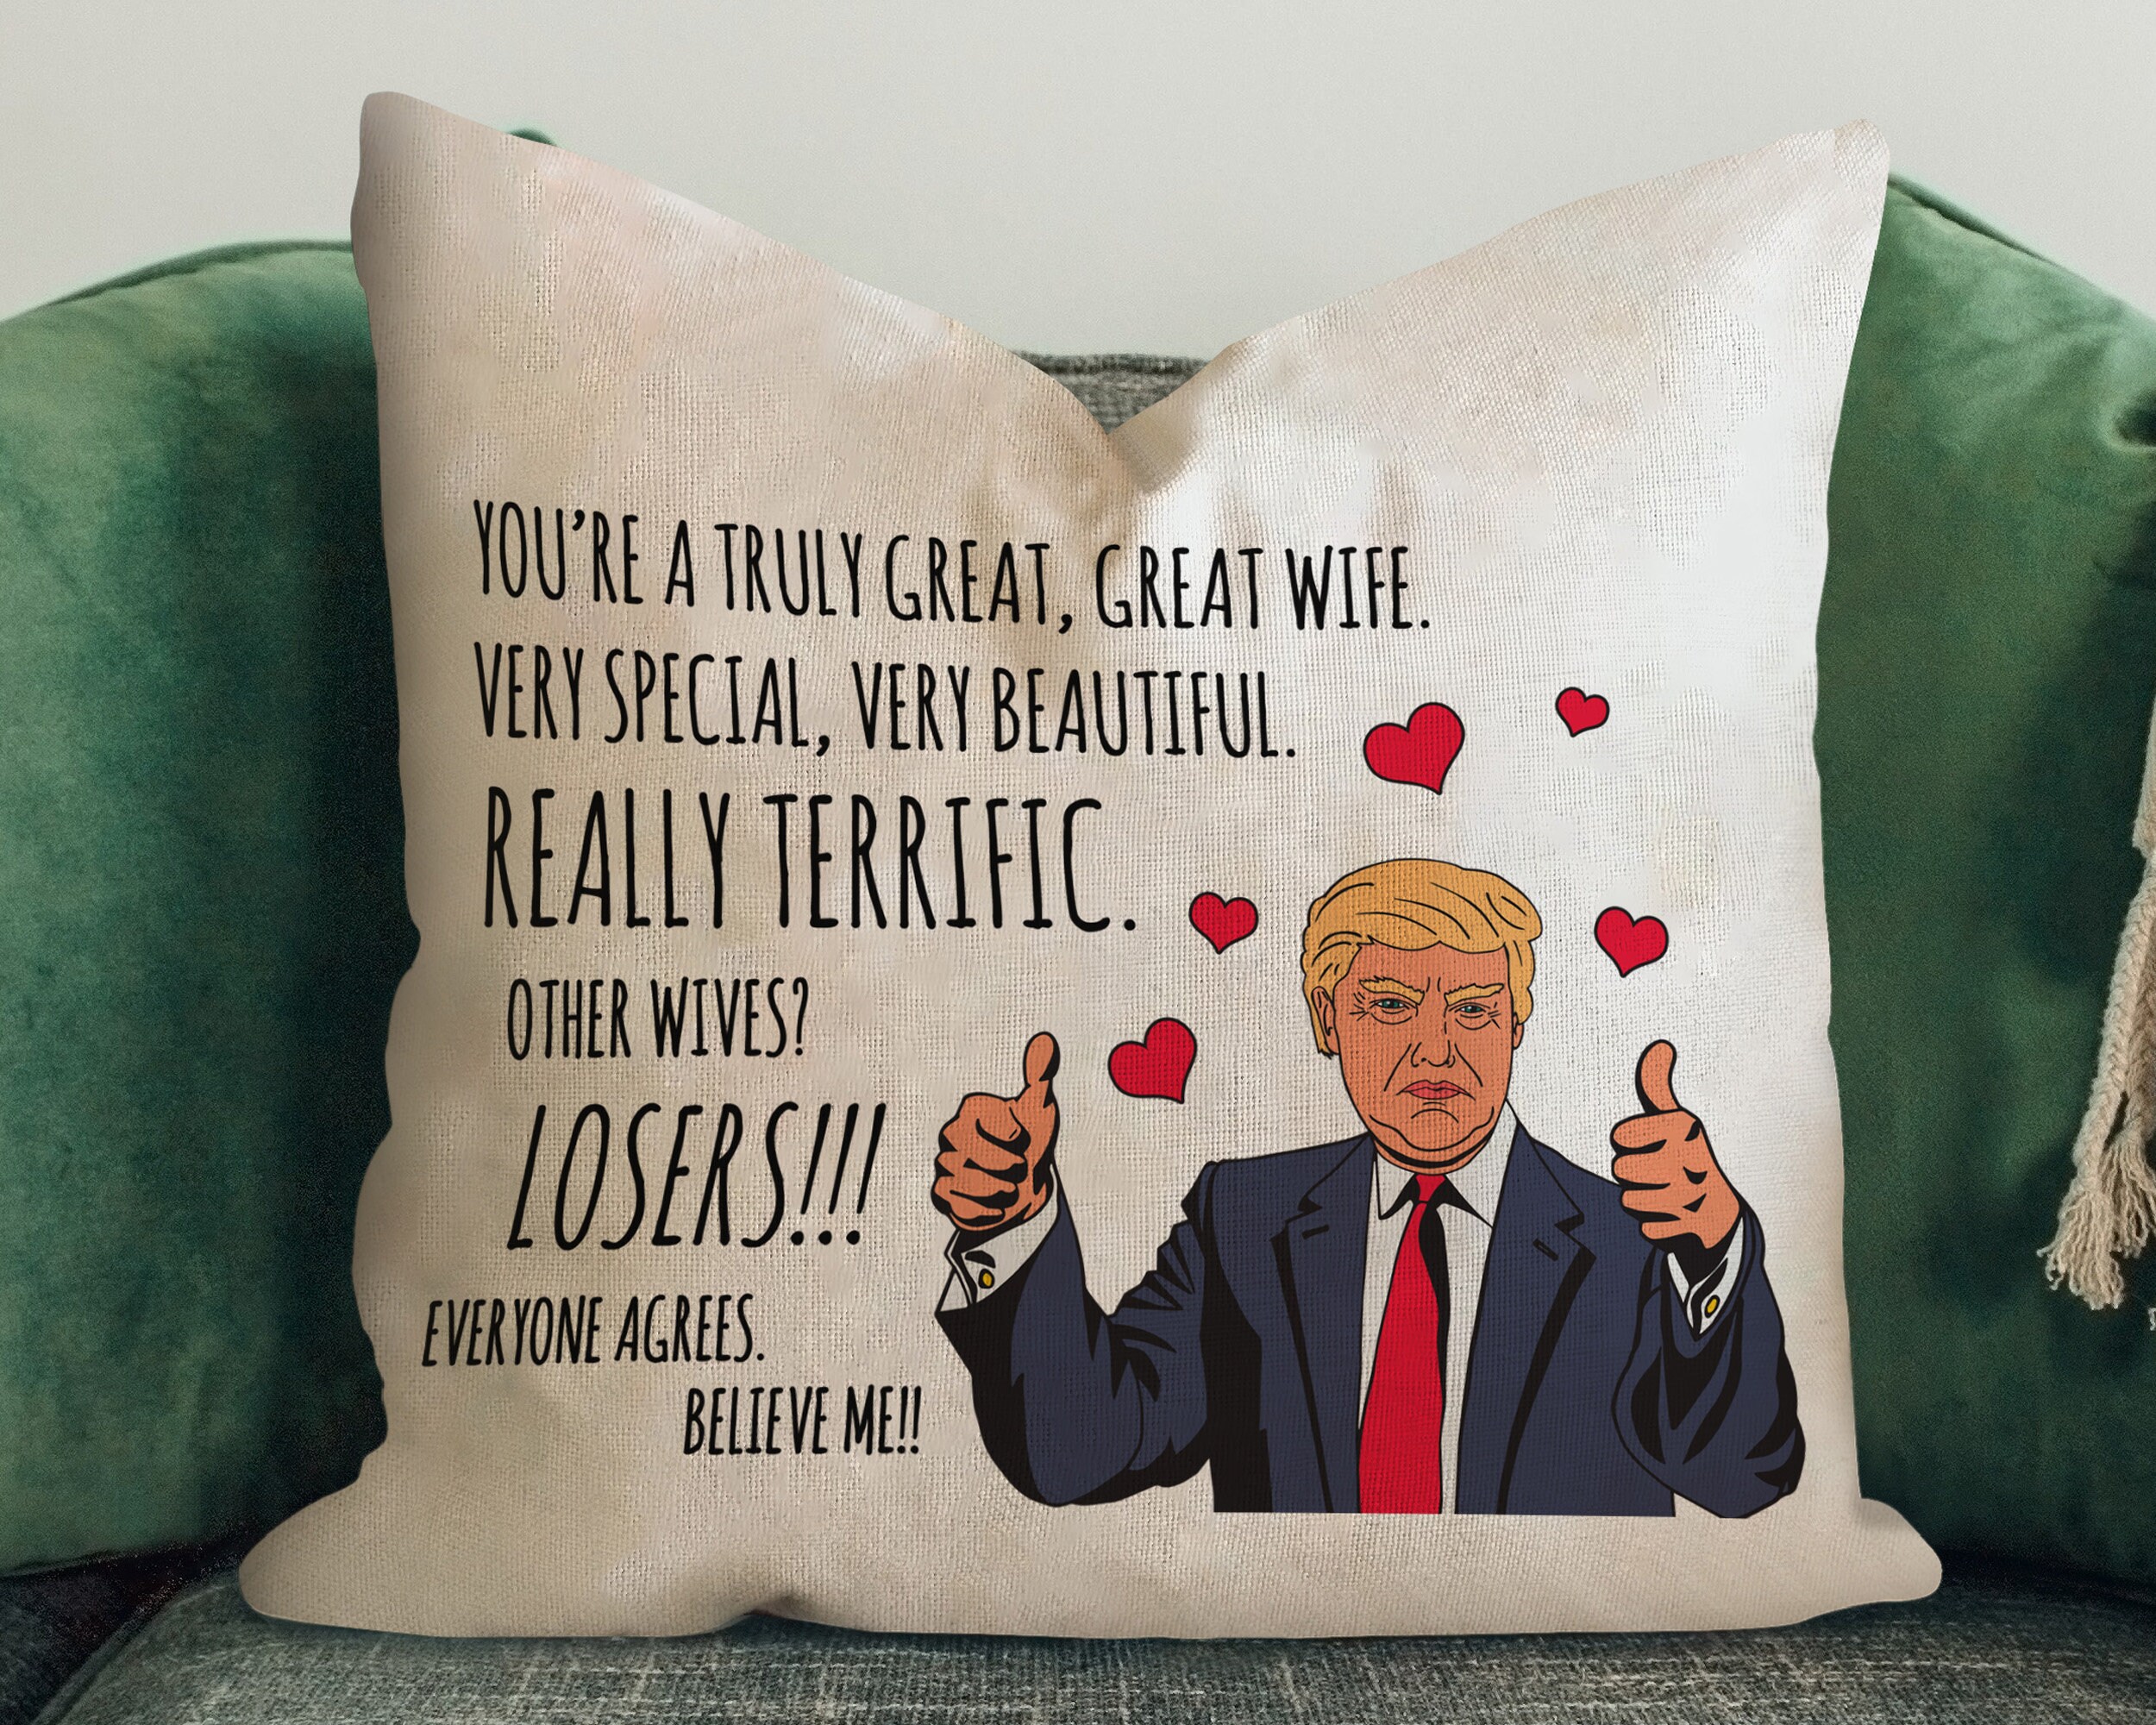  Donald Trump Make Halloween Great Again Pillowcase Funny Trump  Voter Halloween (5) Pillowcase Double Sided Throw Pillow Case 20X20  Decorative Cushion Cover for Couch Sofa Bed Car : Home & Kitchen